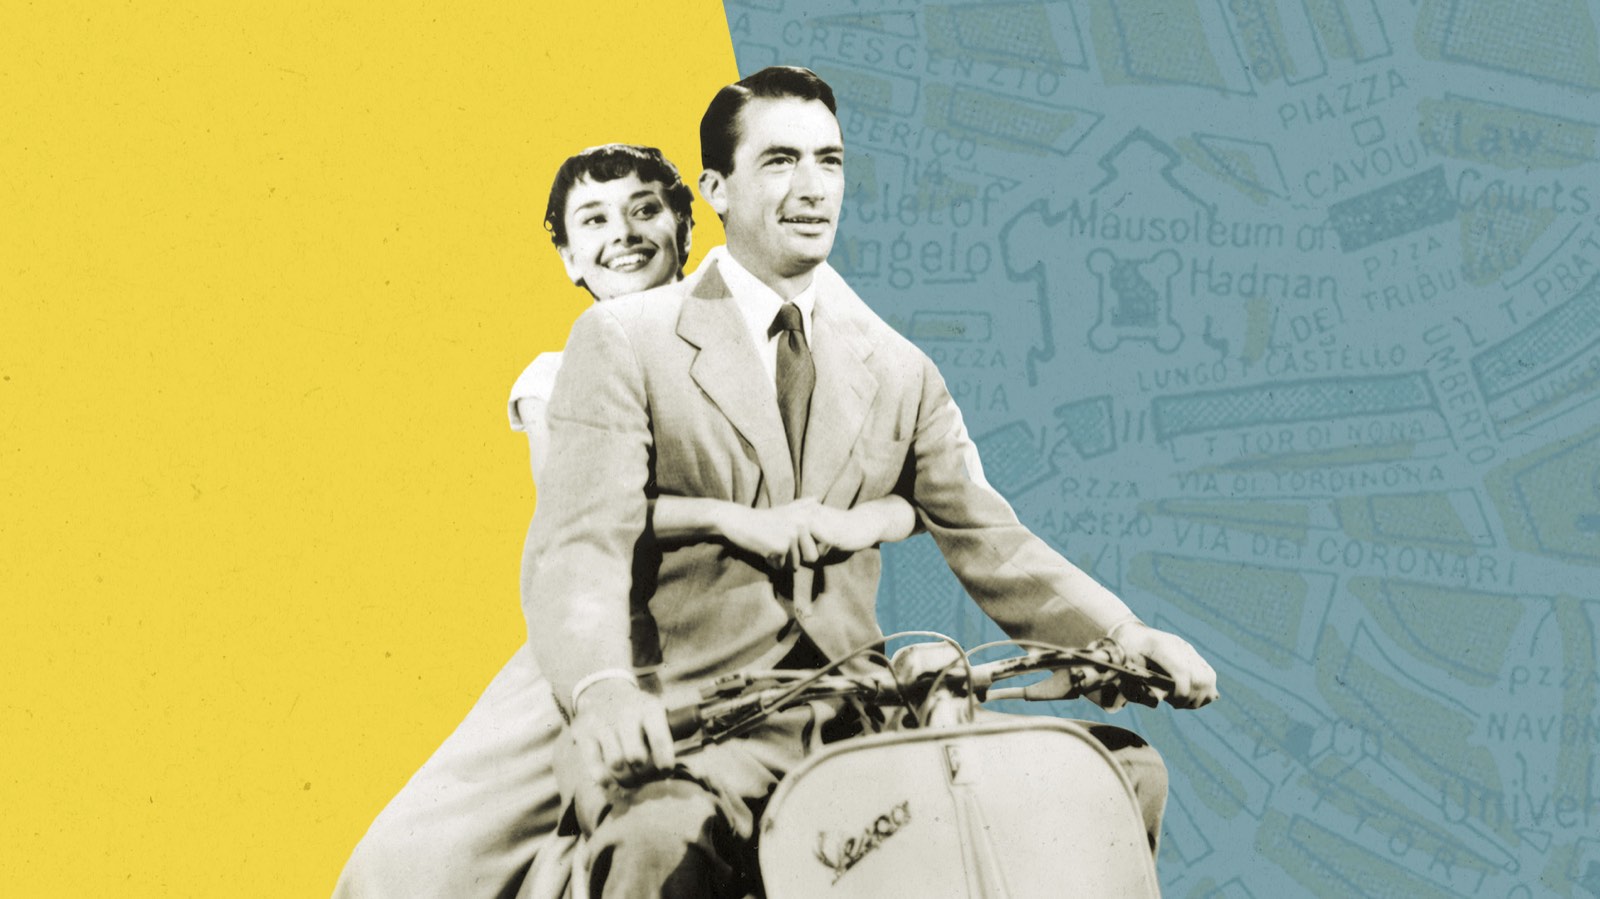 Roman Holiday lovingly restored in 4K to celebrate 70 years